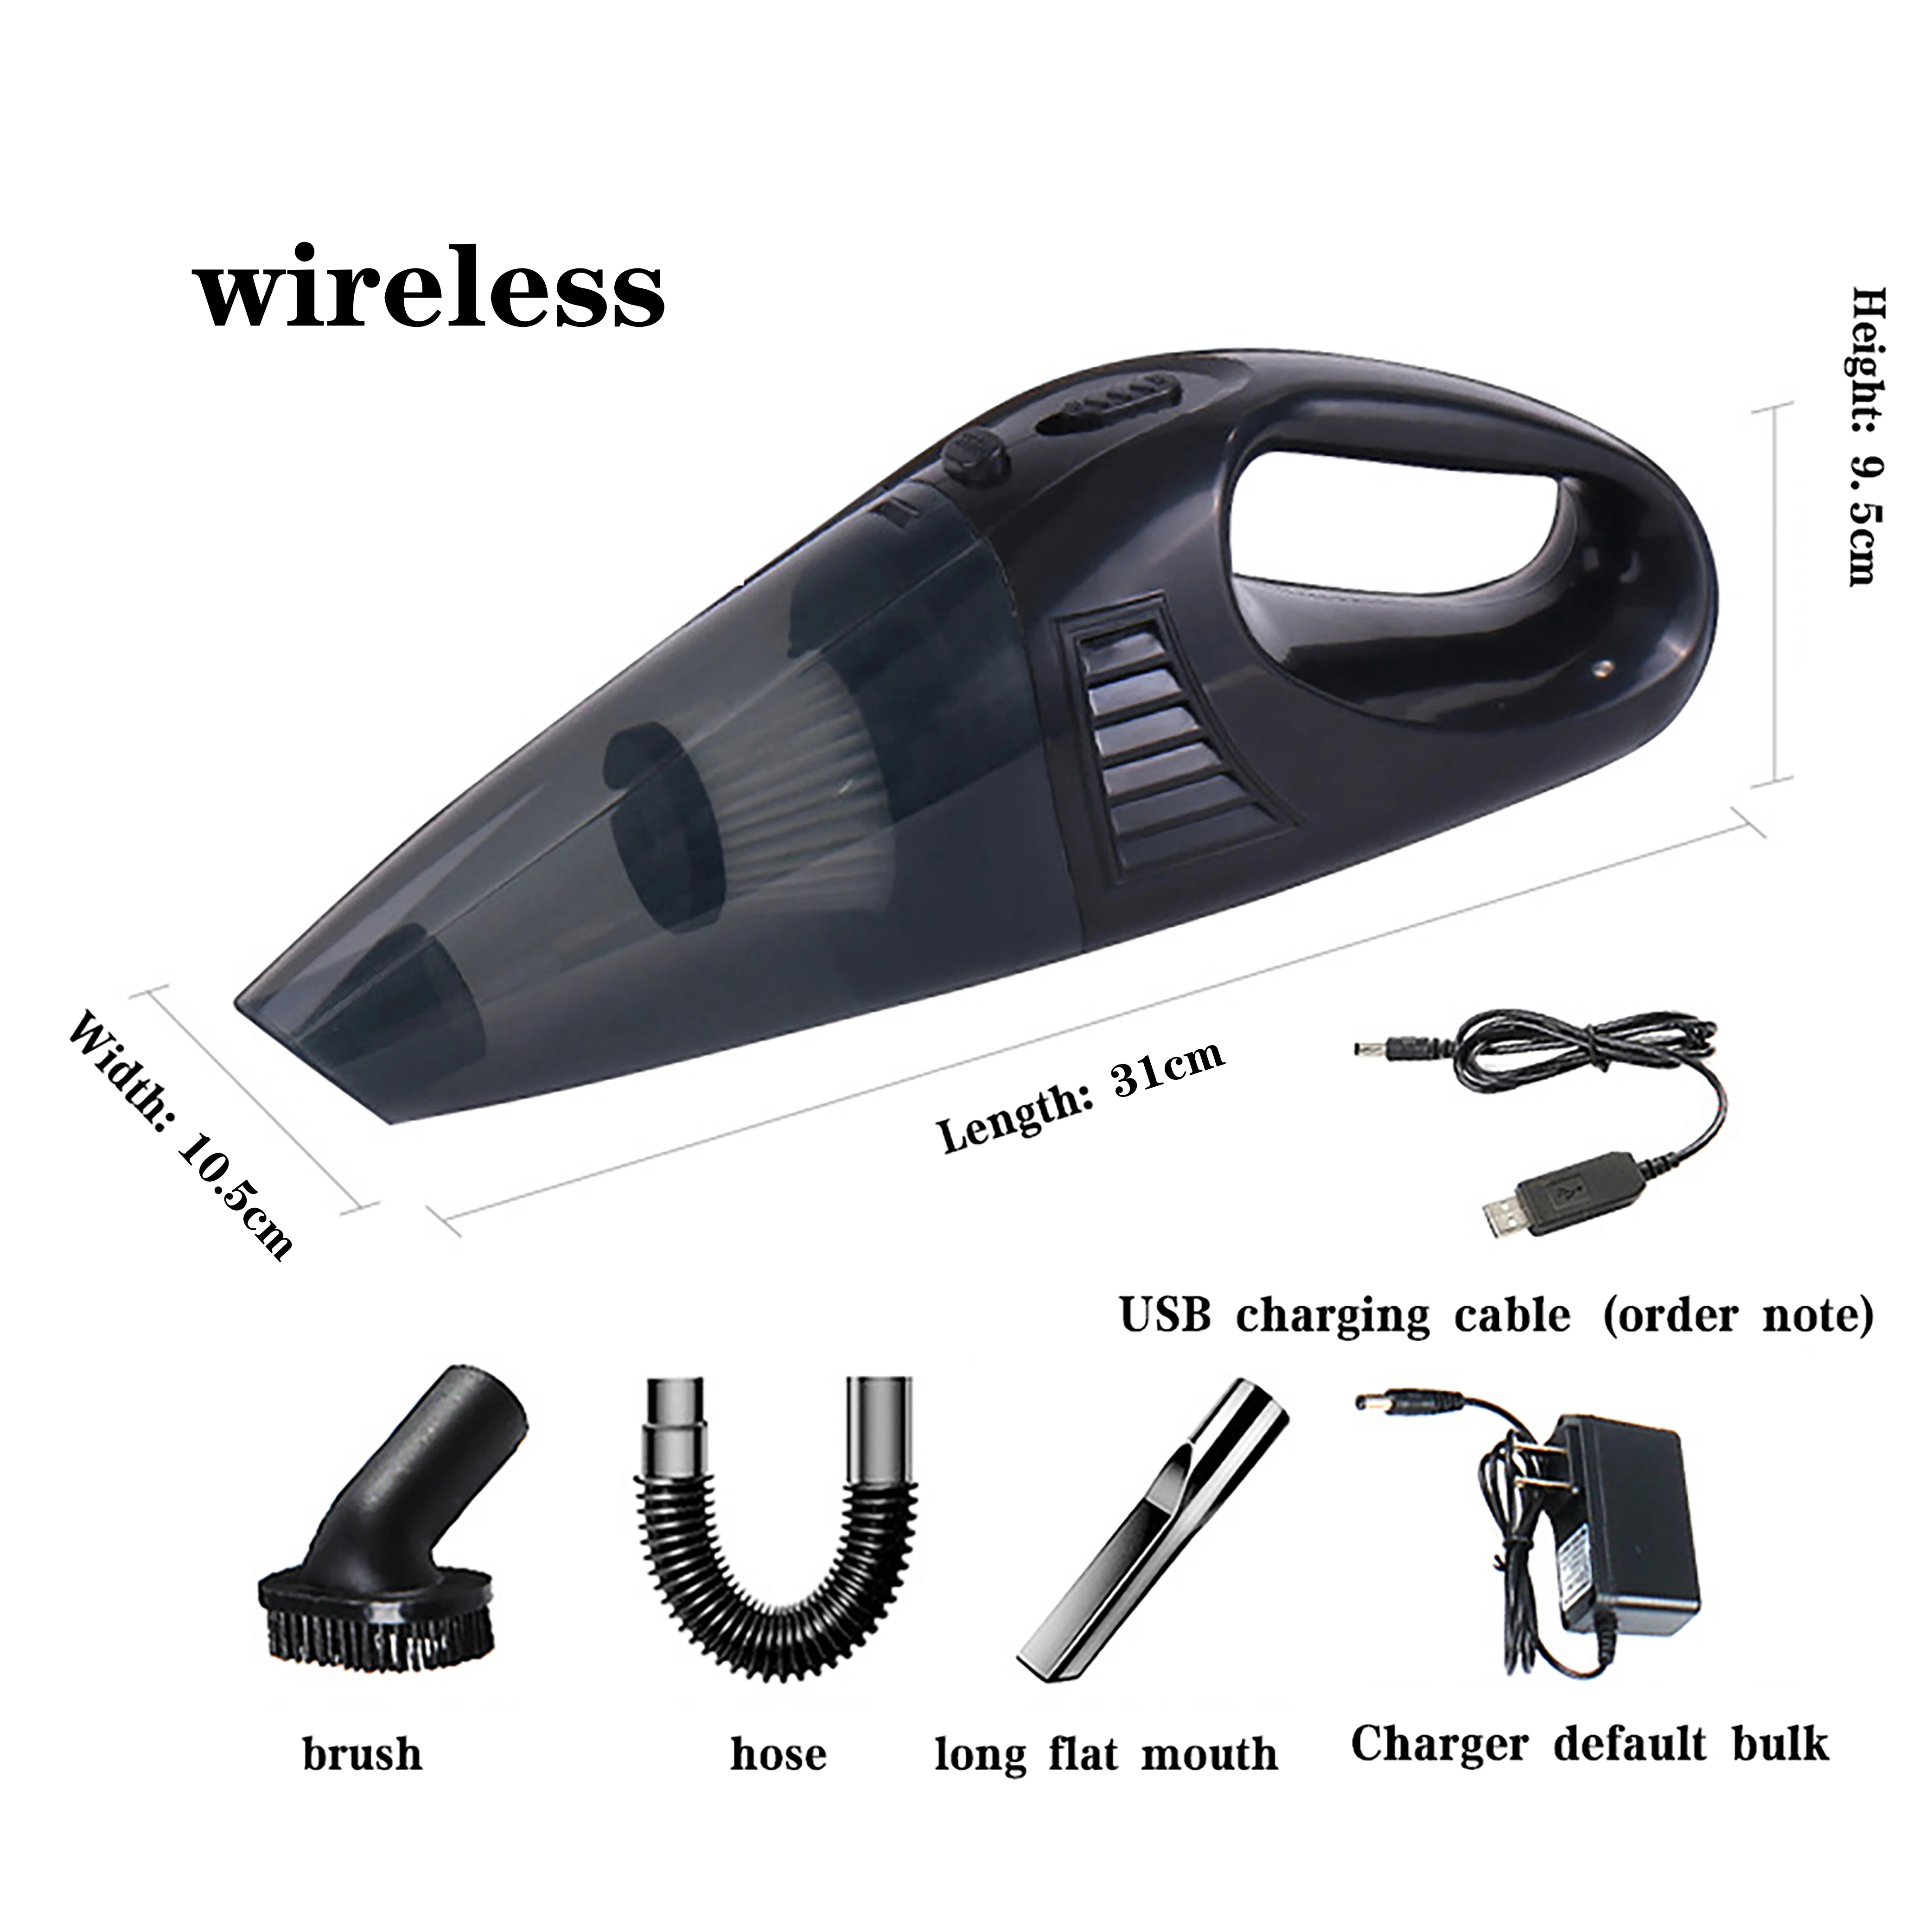 Good price for Cordless Powerful Suction Sweeper handheld Car Vacuum Cleaner